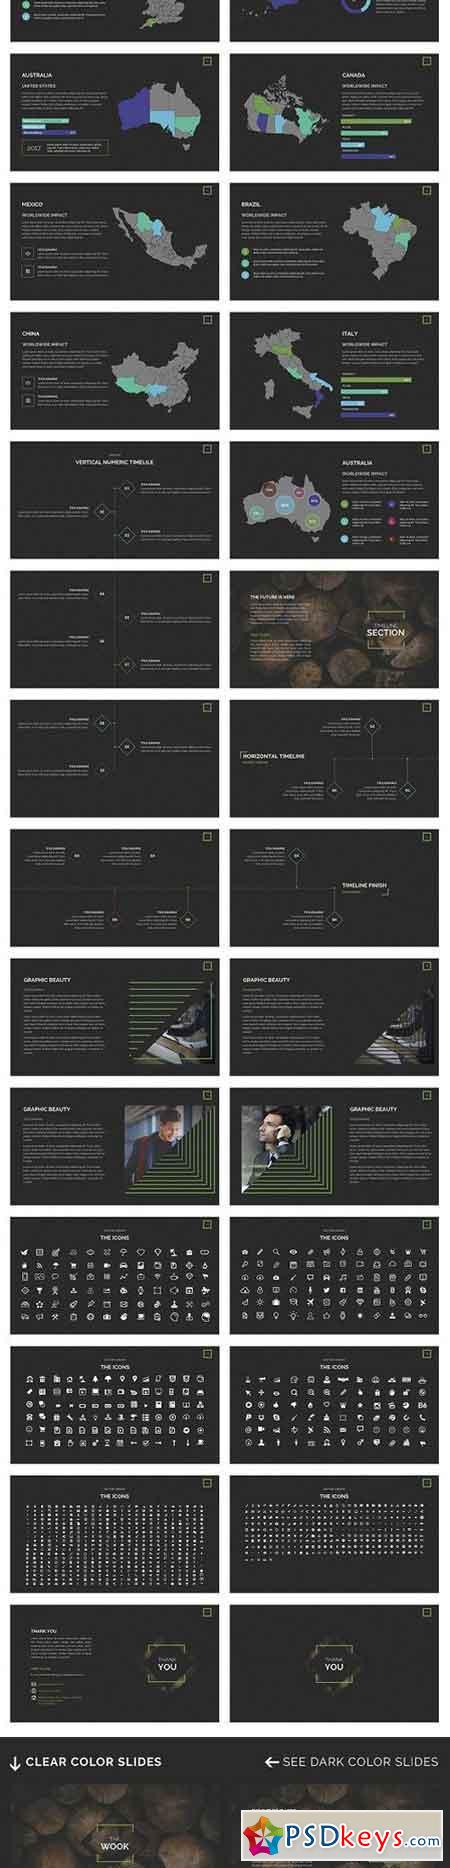 Wook Powerpoint Template 1292814